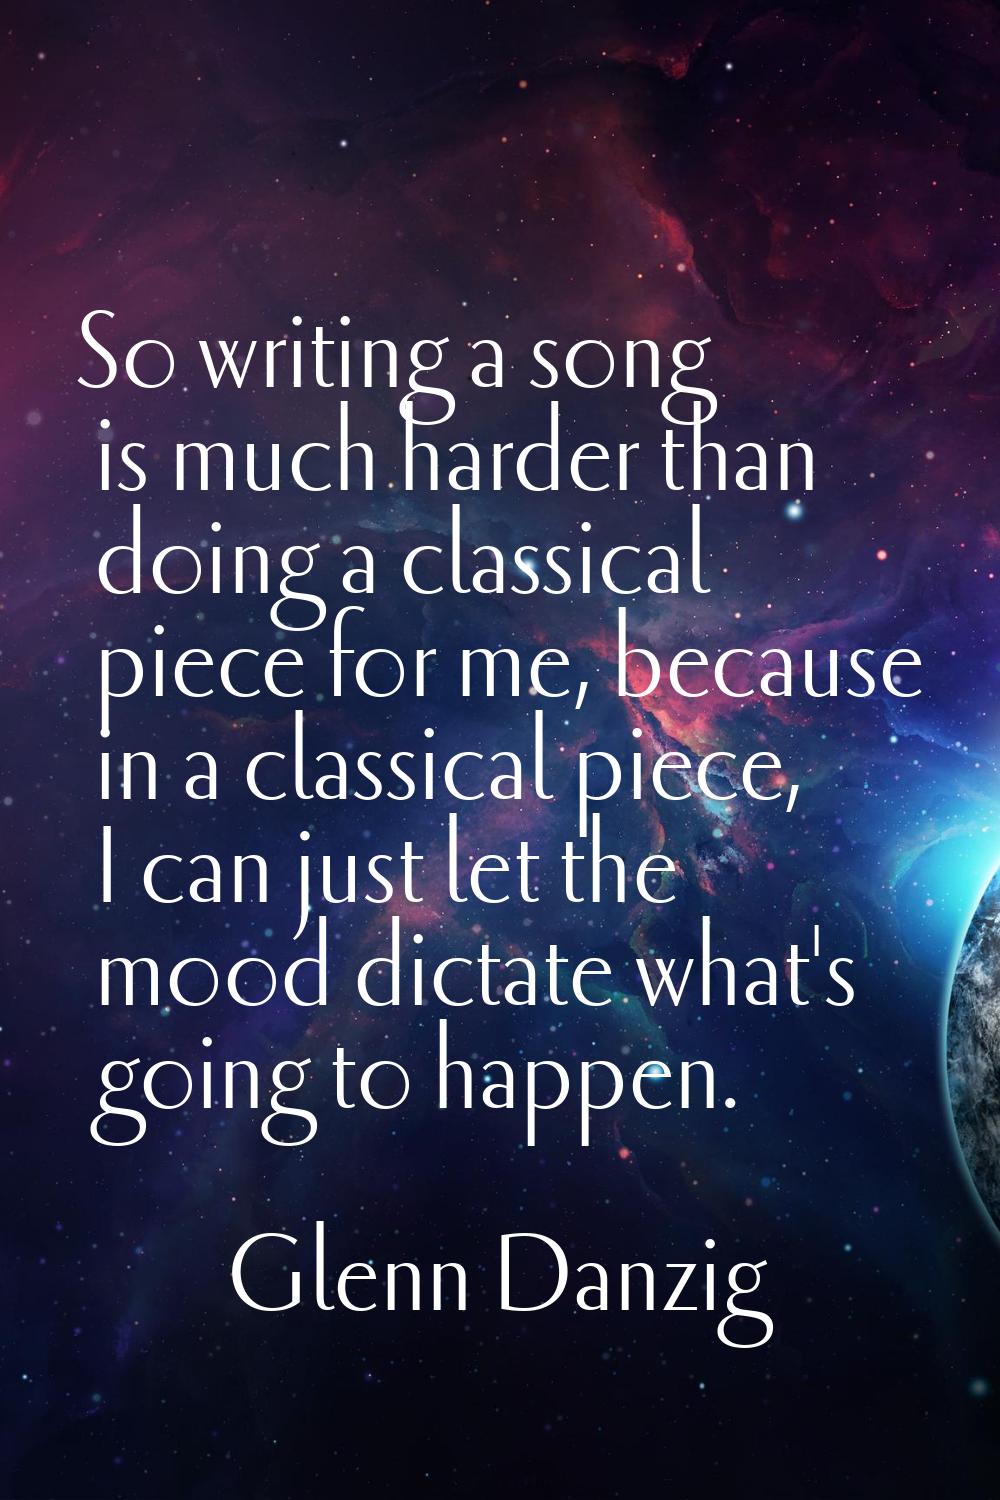 So writing a song is much harder than doing a classical piece for me, because in a classical piece,